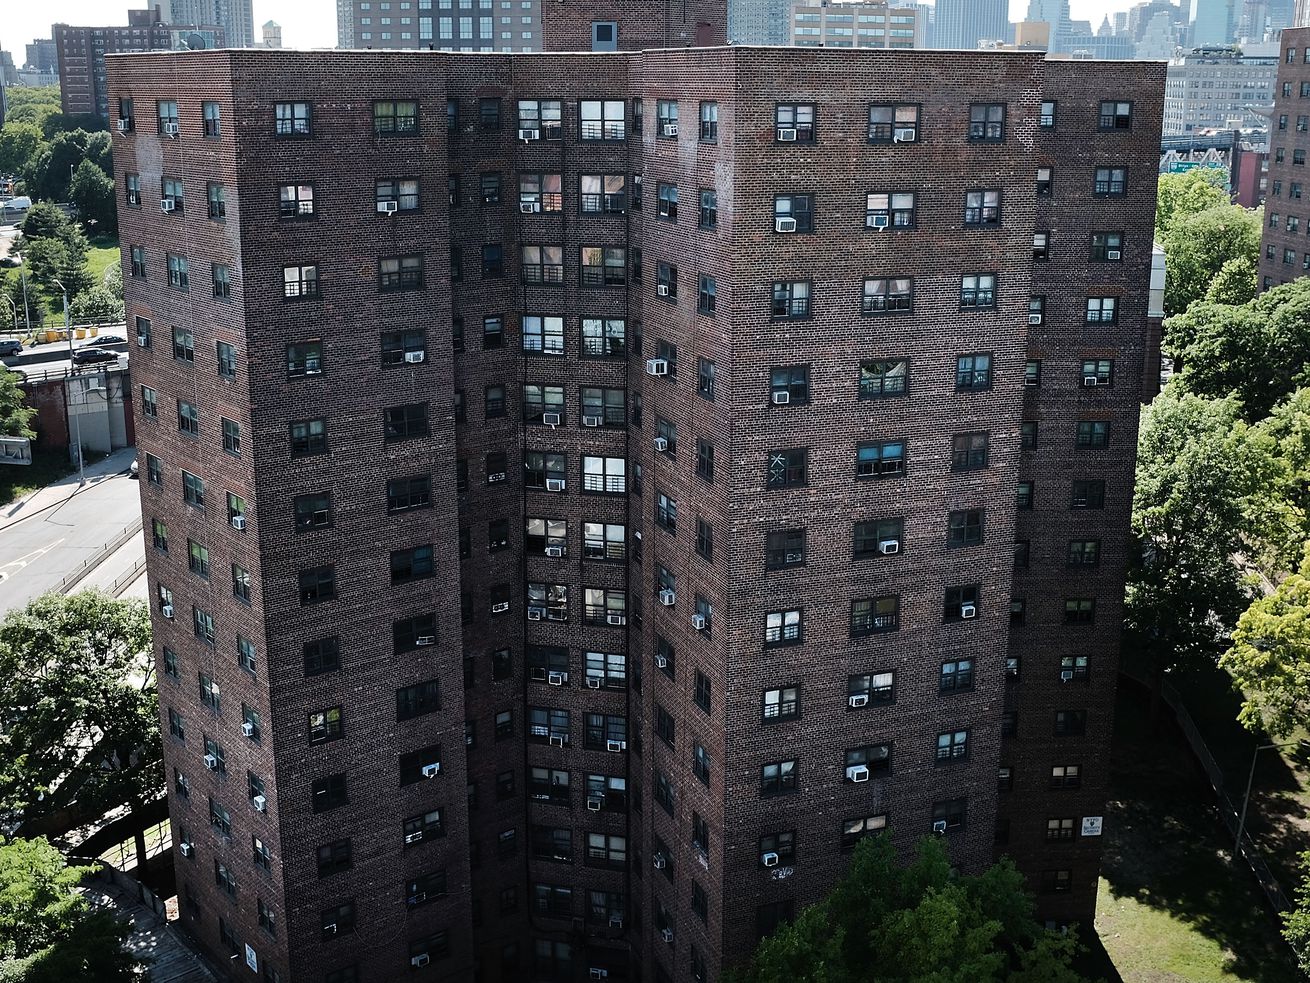 America’s low-income housing stock is very old